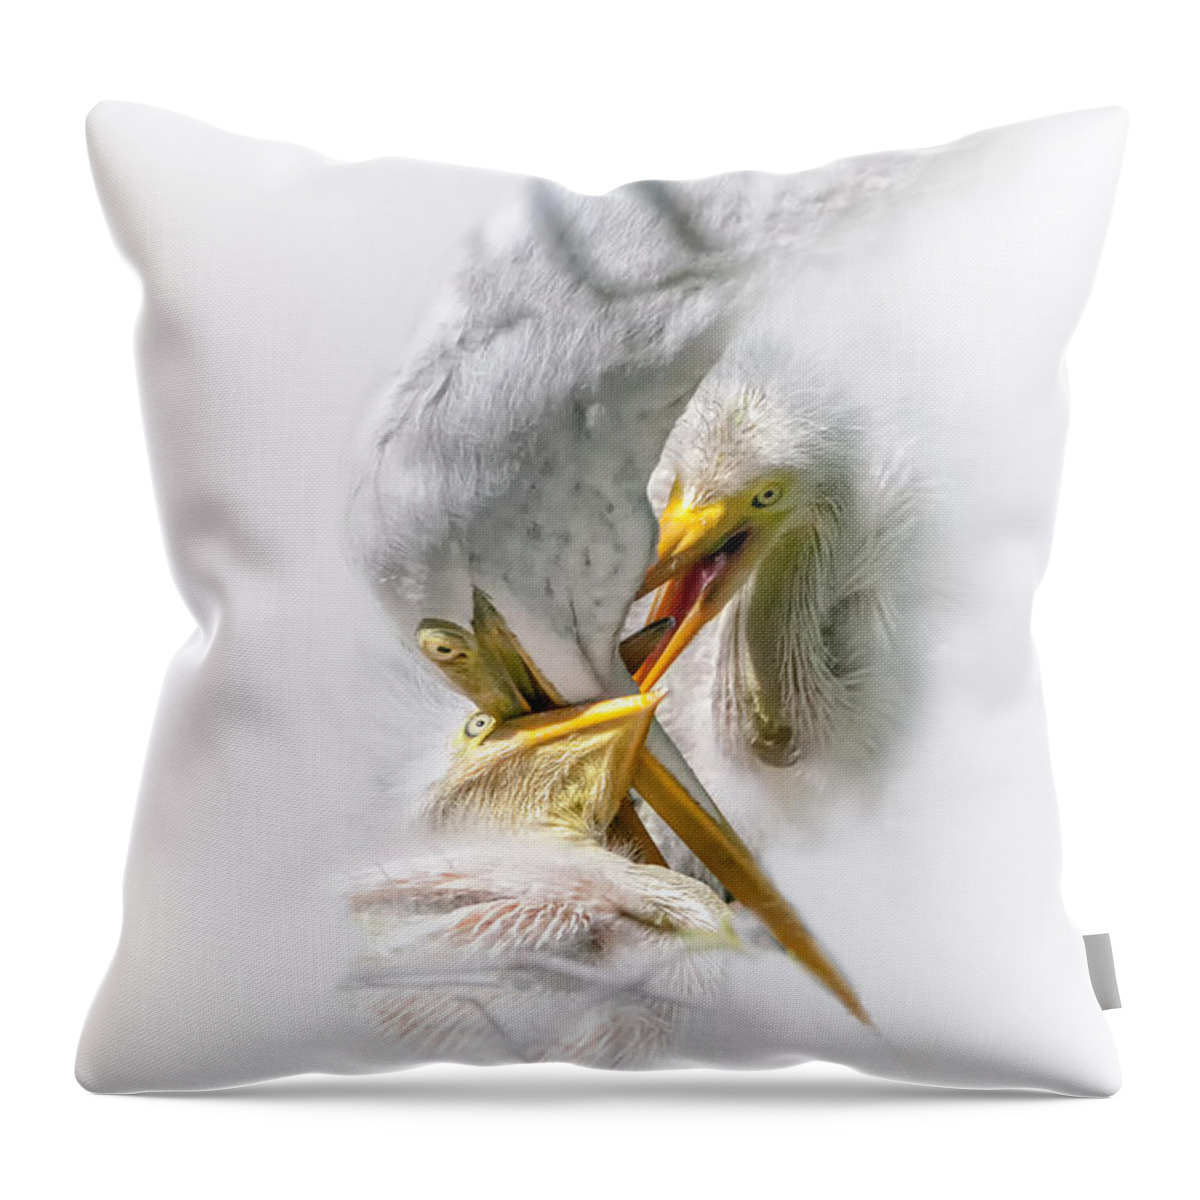 Great White Heron Throw Pillow featuring the photograph Home Delivery by Ghostwinds Photography